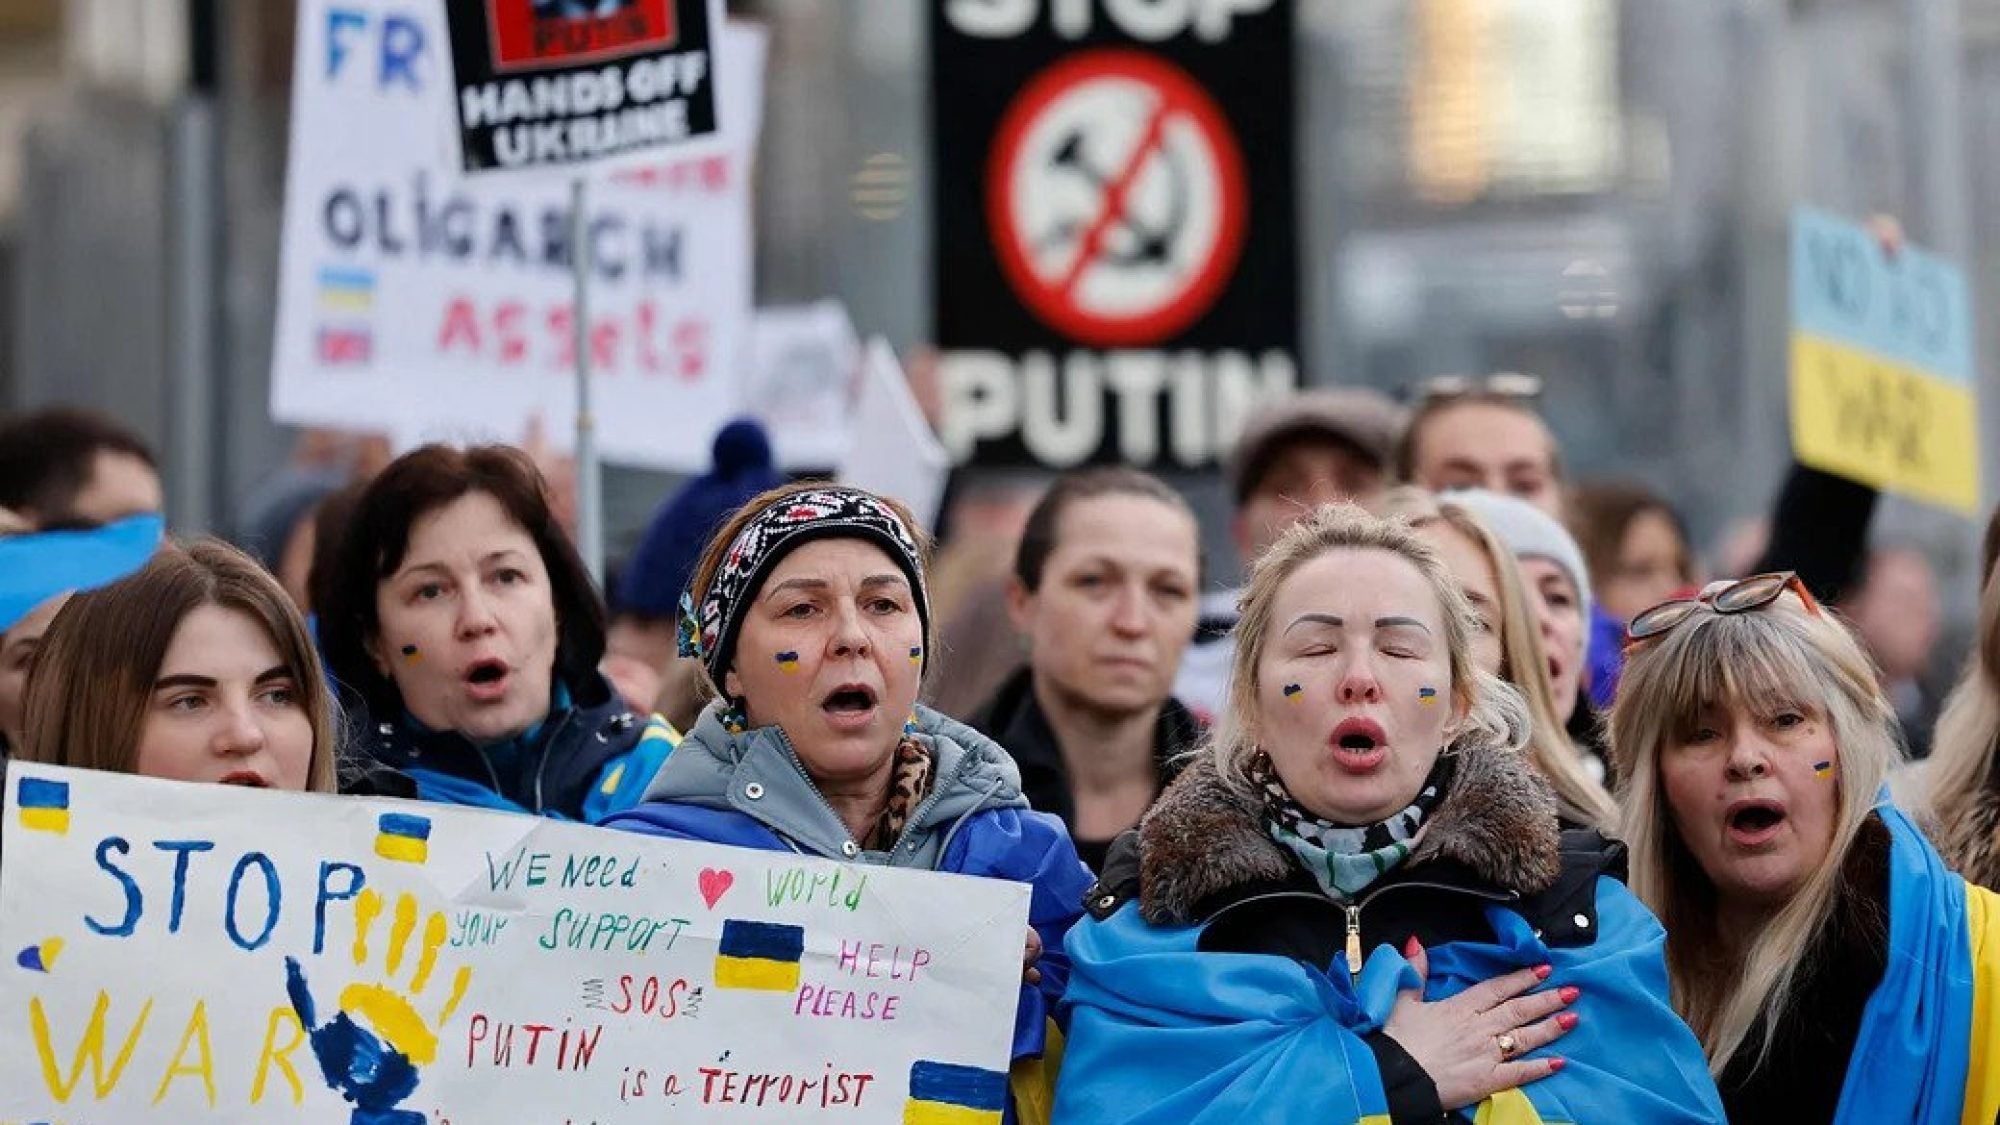 Women protesting, wrapped in Ukraine flags, holding signs.